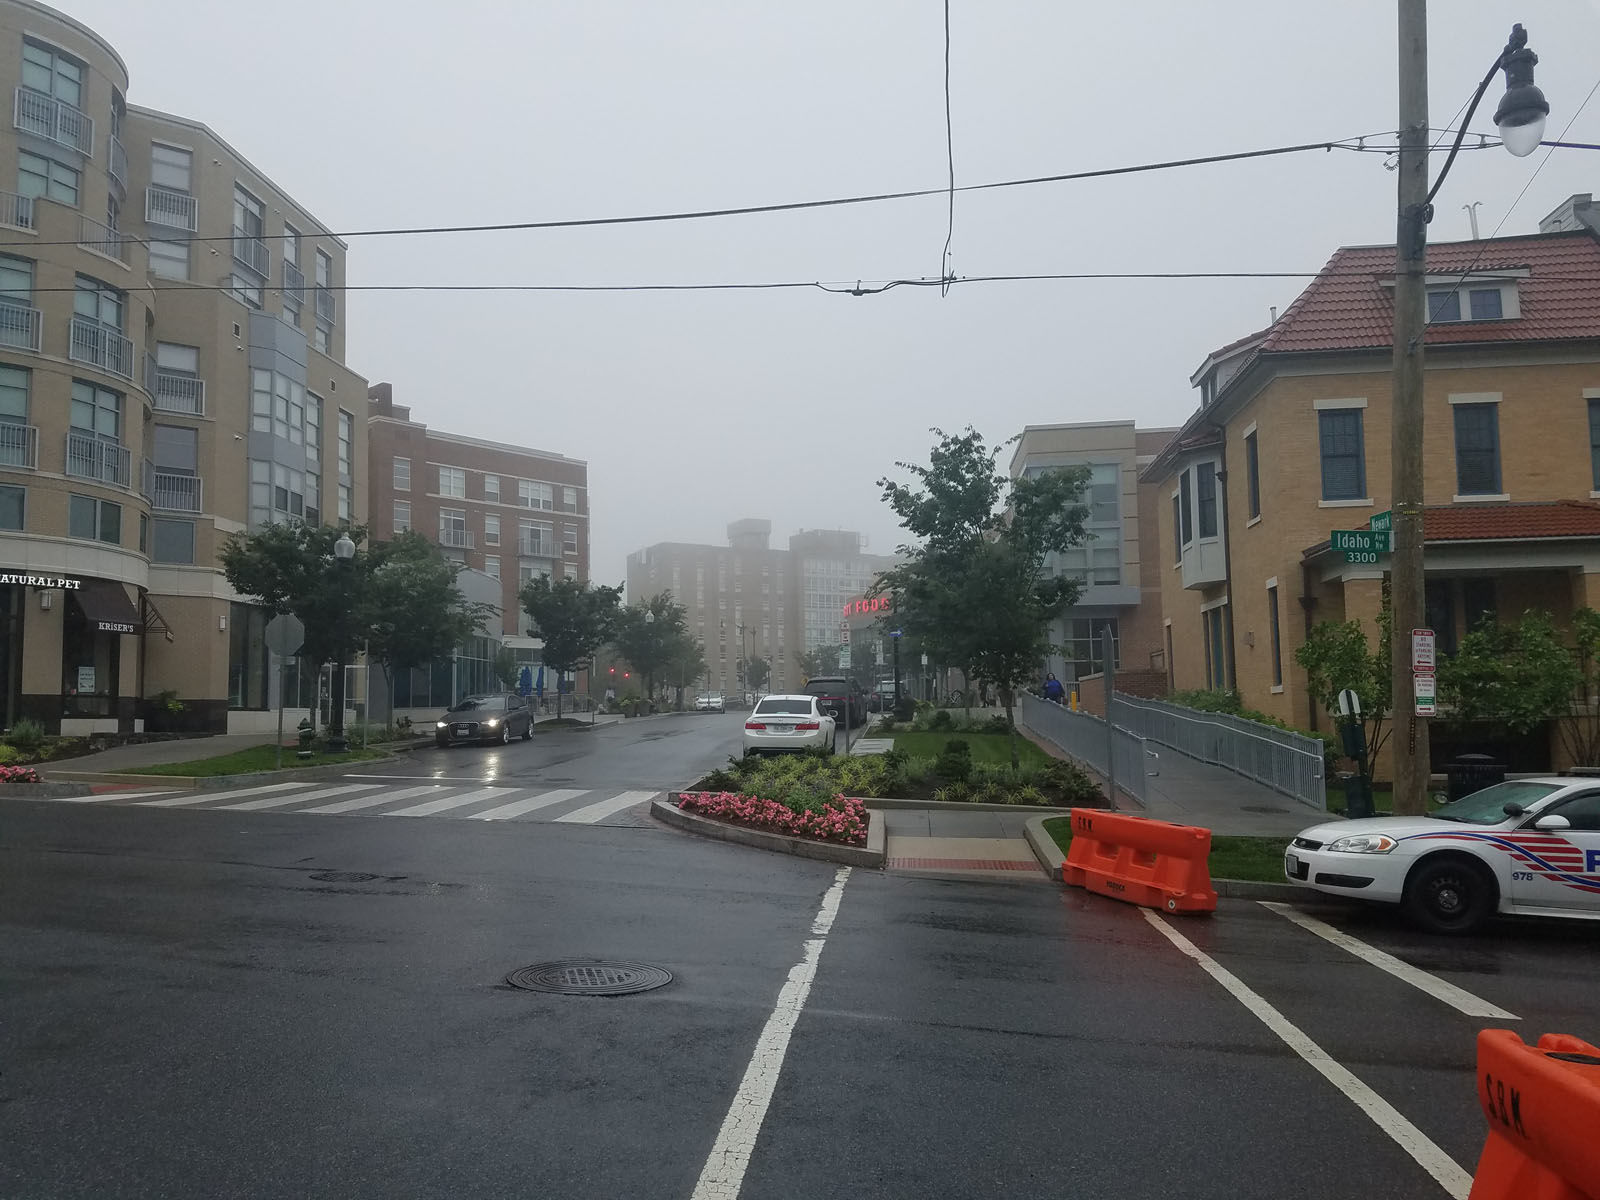 Rain soaked streets on Thursday morning in Northwest D.C., a flash flood watch will be in effect for most of the D.C. area starting at 2 p.m. (WTOP/Will Vitka)